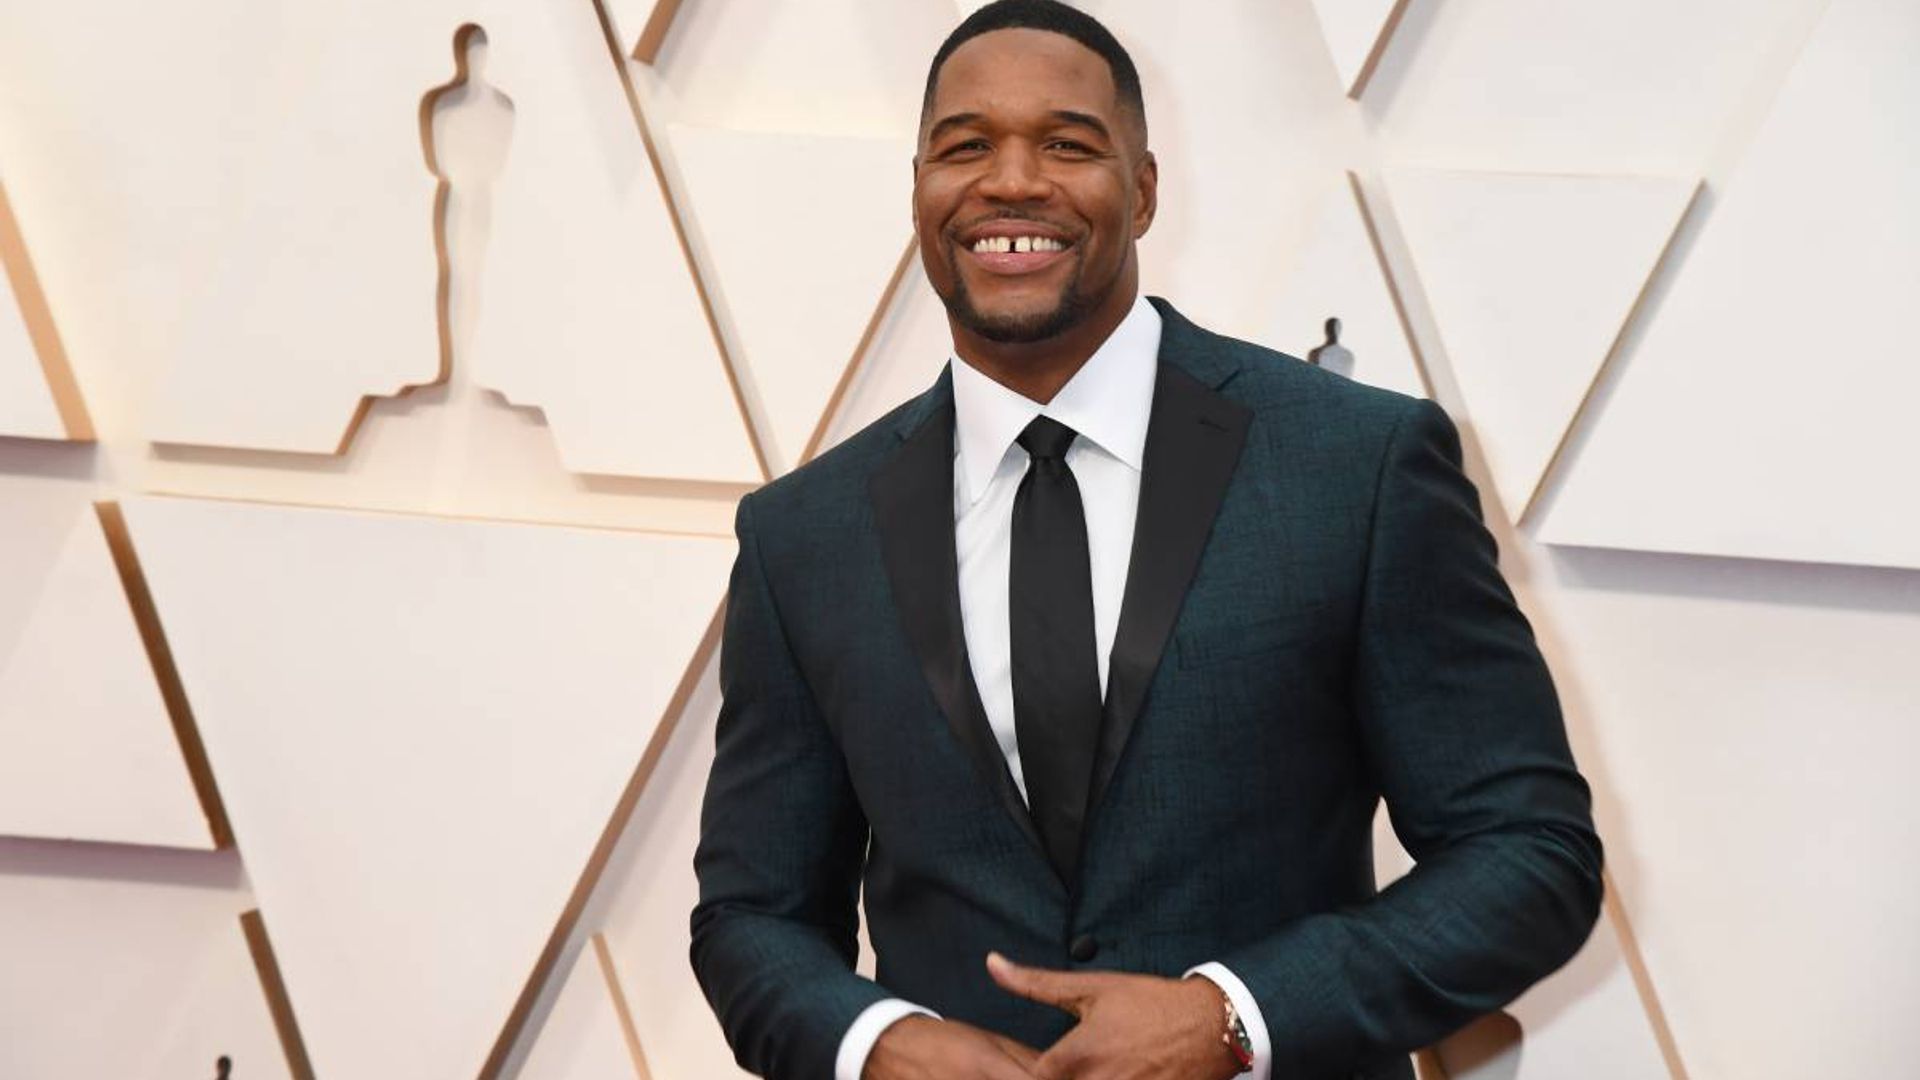 GMA'S Michael Strahan delights fans with exciting news - 'finally'